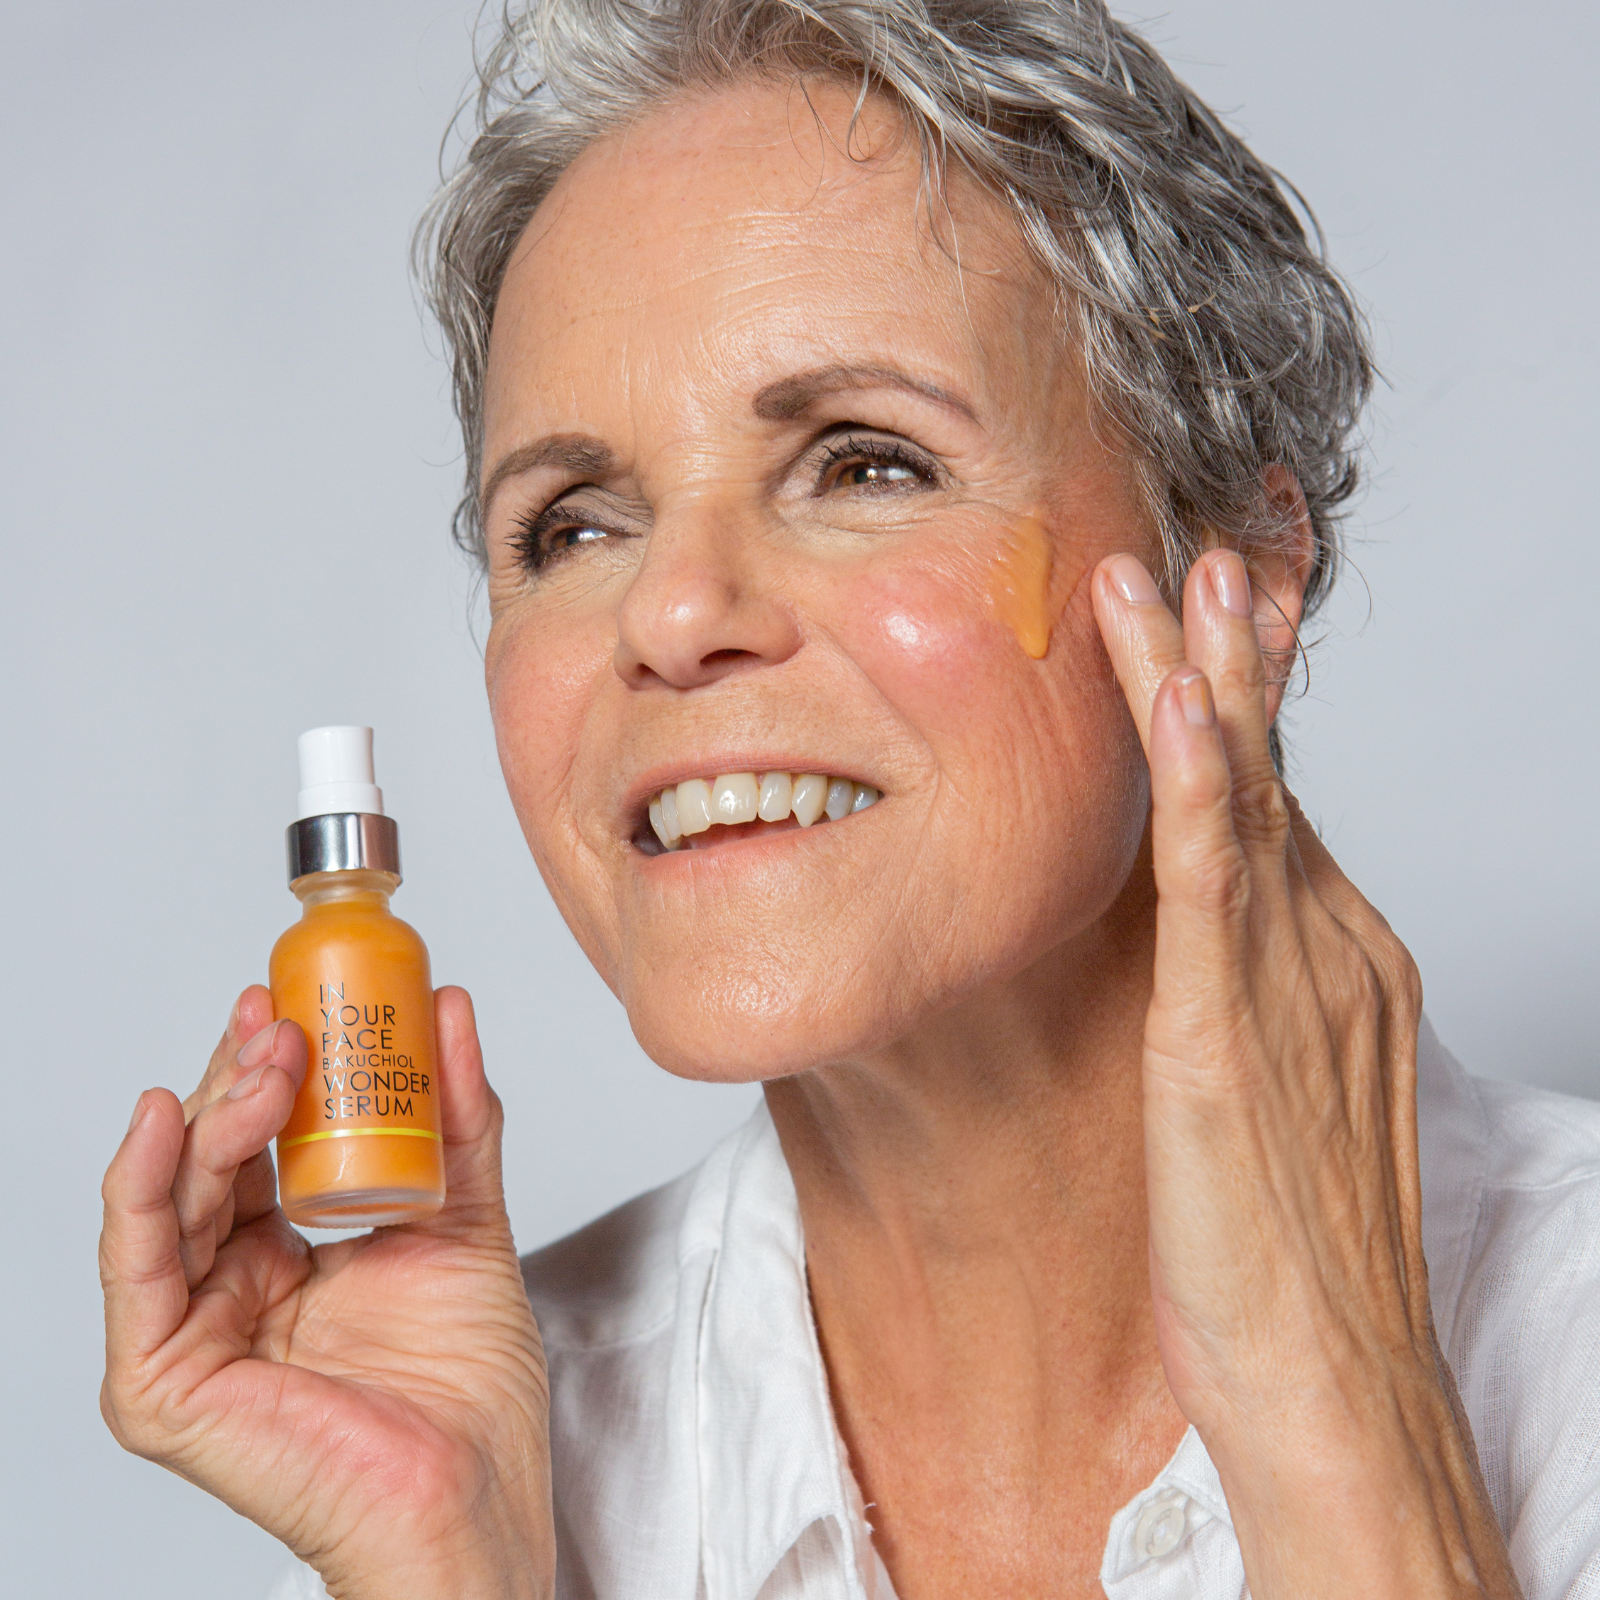 an image of a pretty, short grey-haired mature woman, holding a bottle of the BAKUCHIOL WONDER SERUM and applying some to her cheek and smiling.